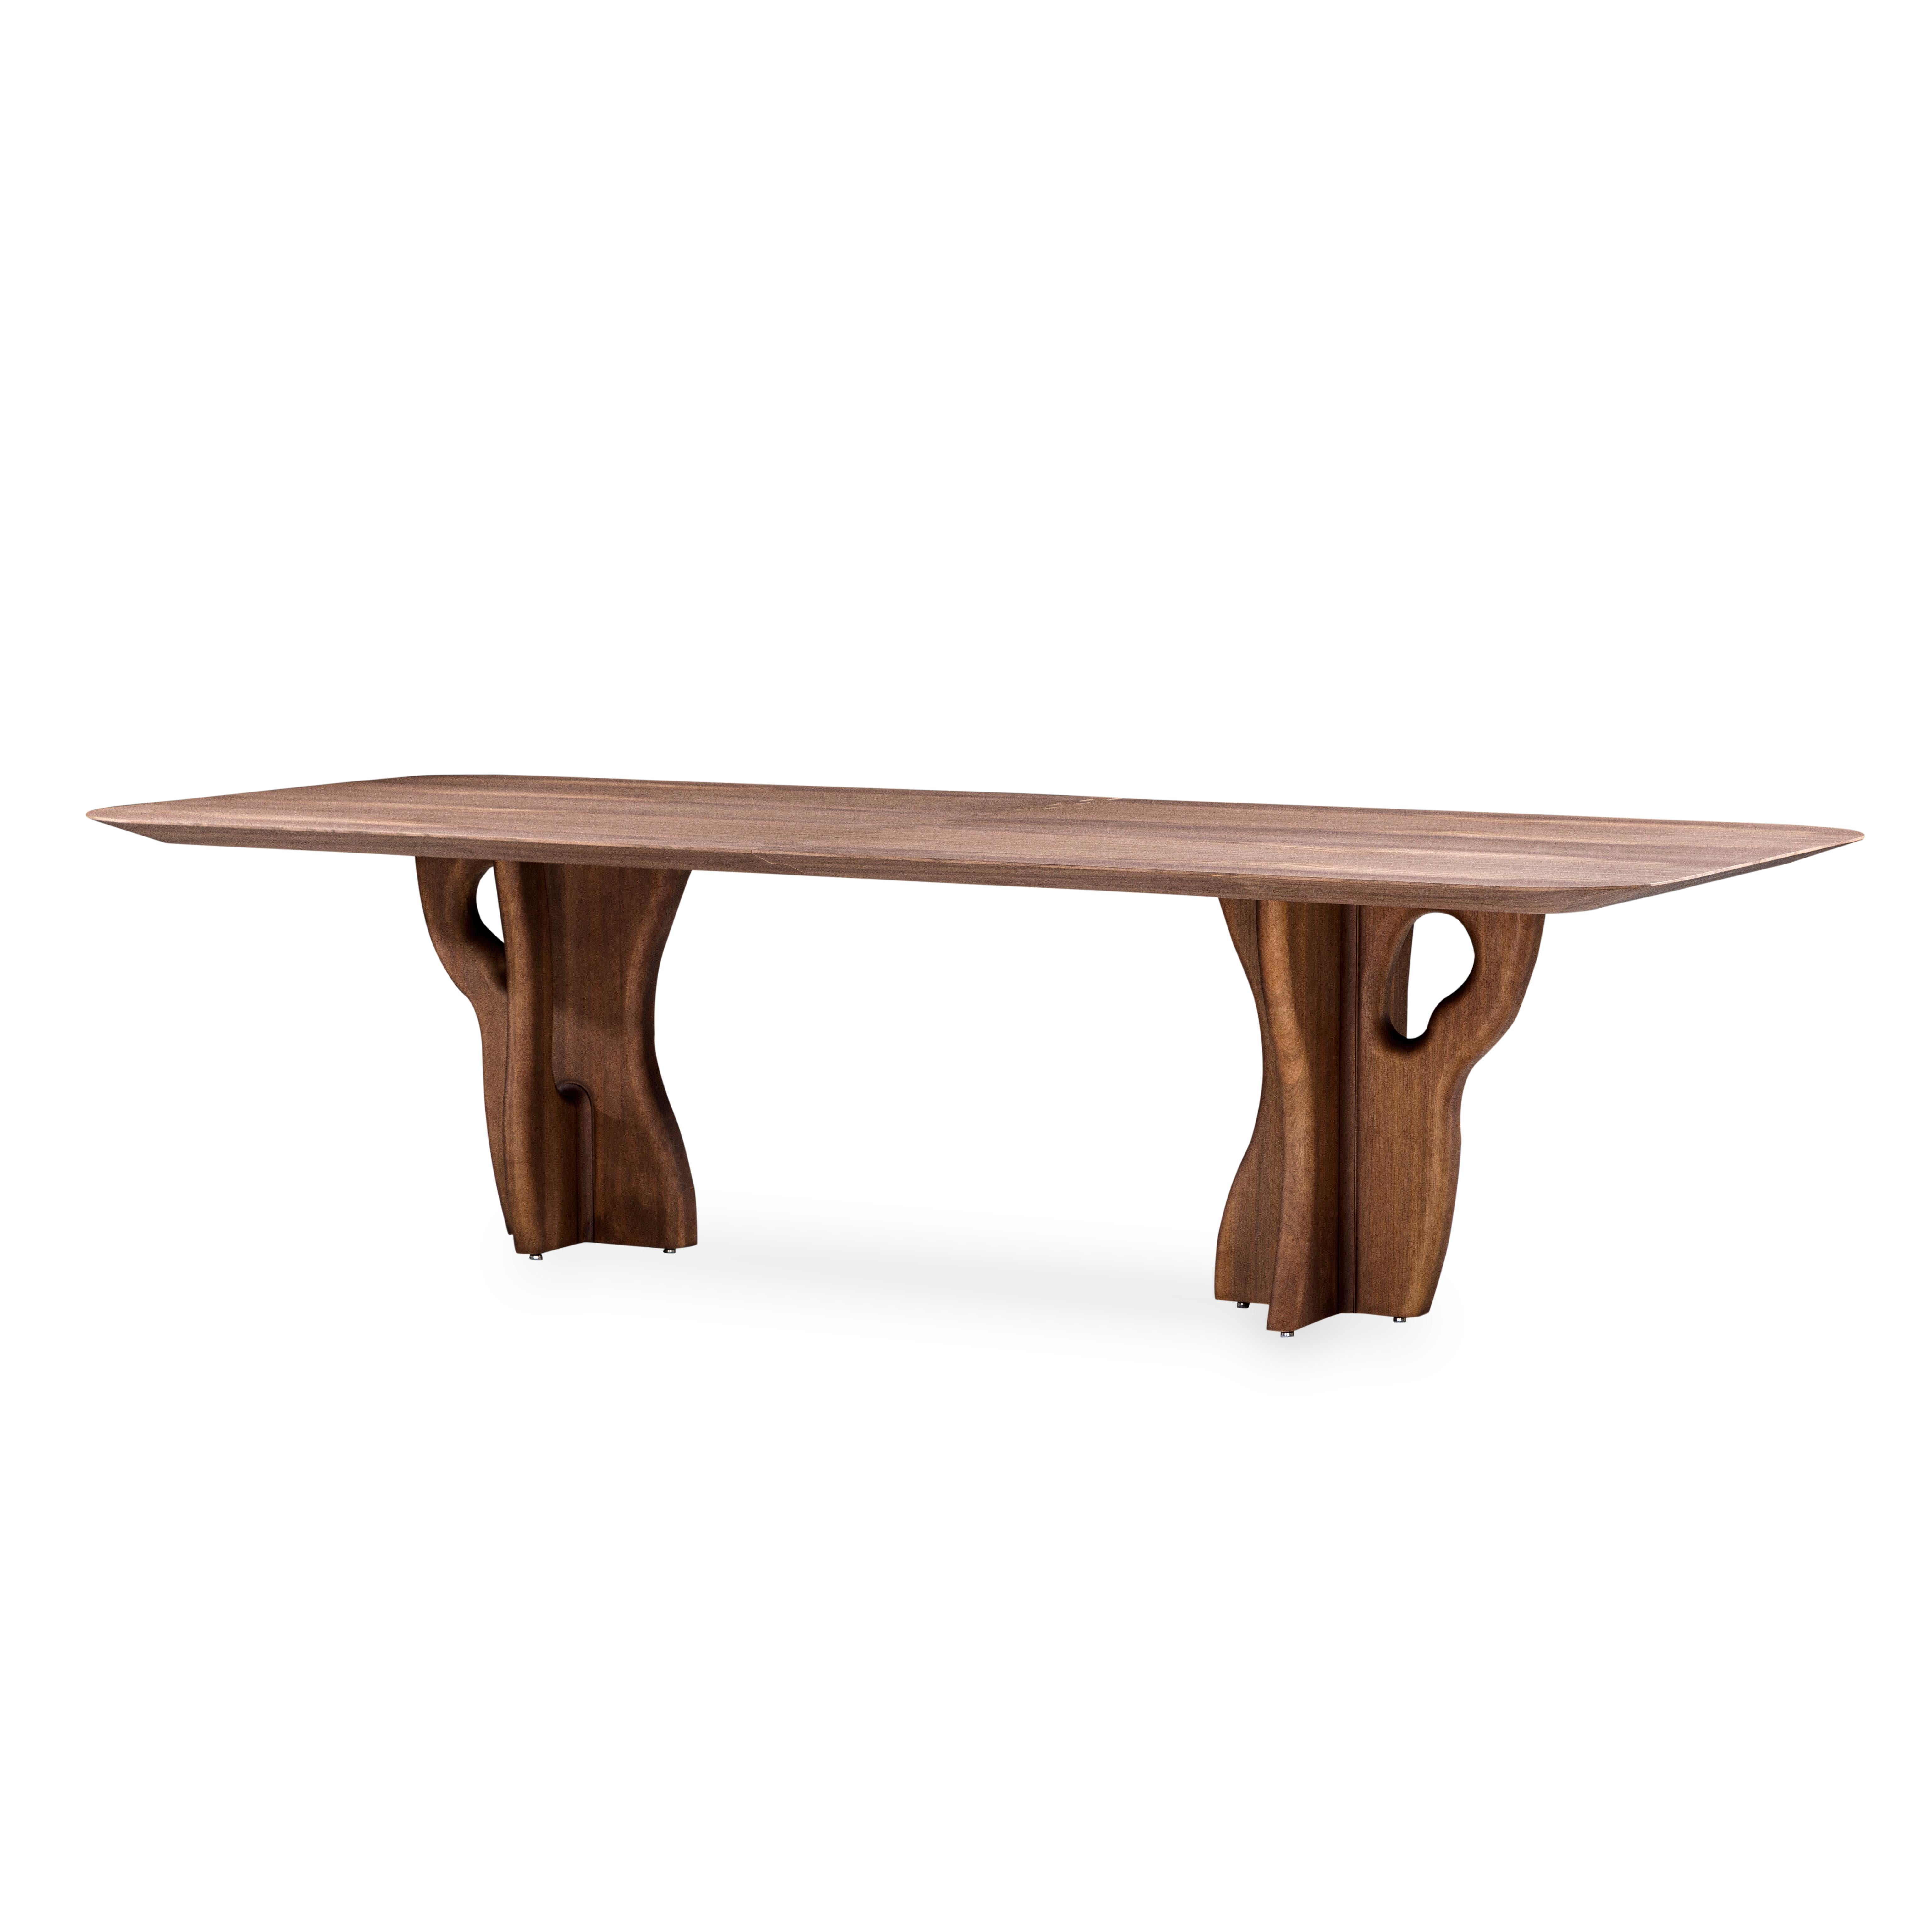 Uultis design team has manufactured the Suma dining table in a walnut veneered finish top with organic solid wood legs, perfect for your dreamed dining space. This is a piece that is designed to be used during meals and gatherings, and it is also